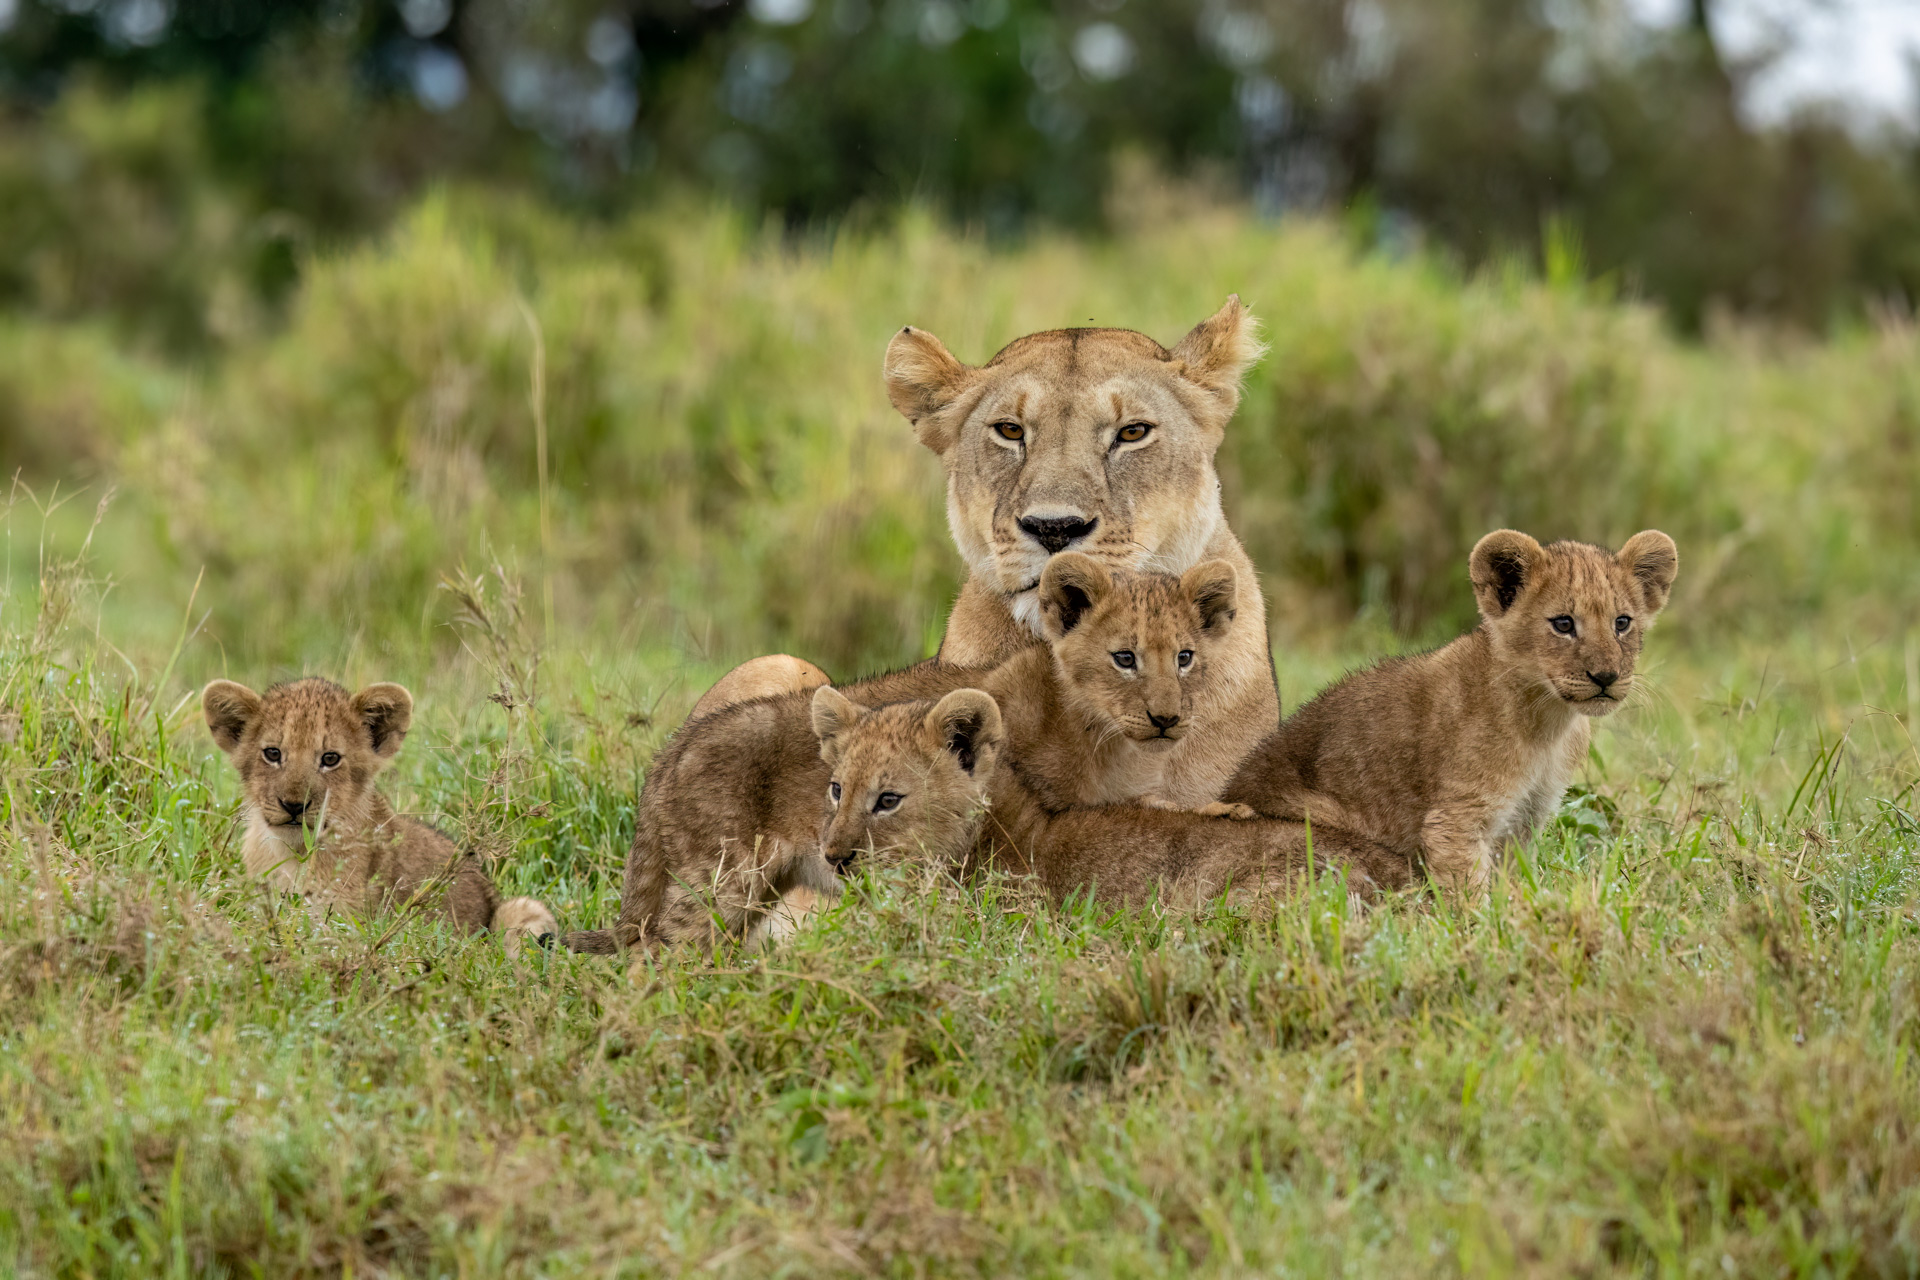 Above: The Angama Pride lioness with her miracle cubs 